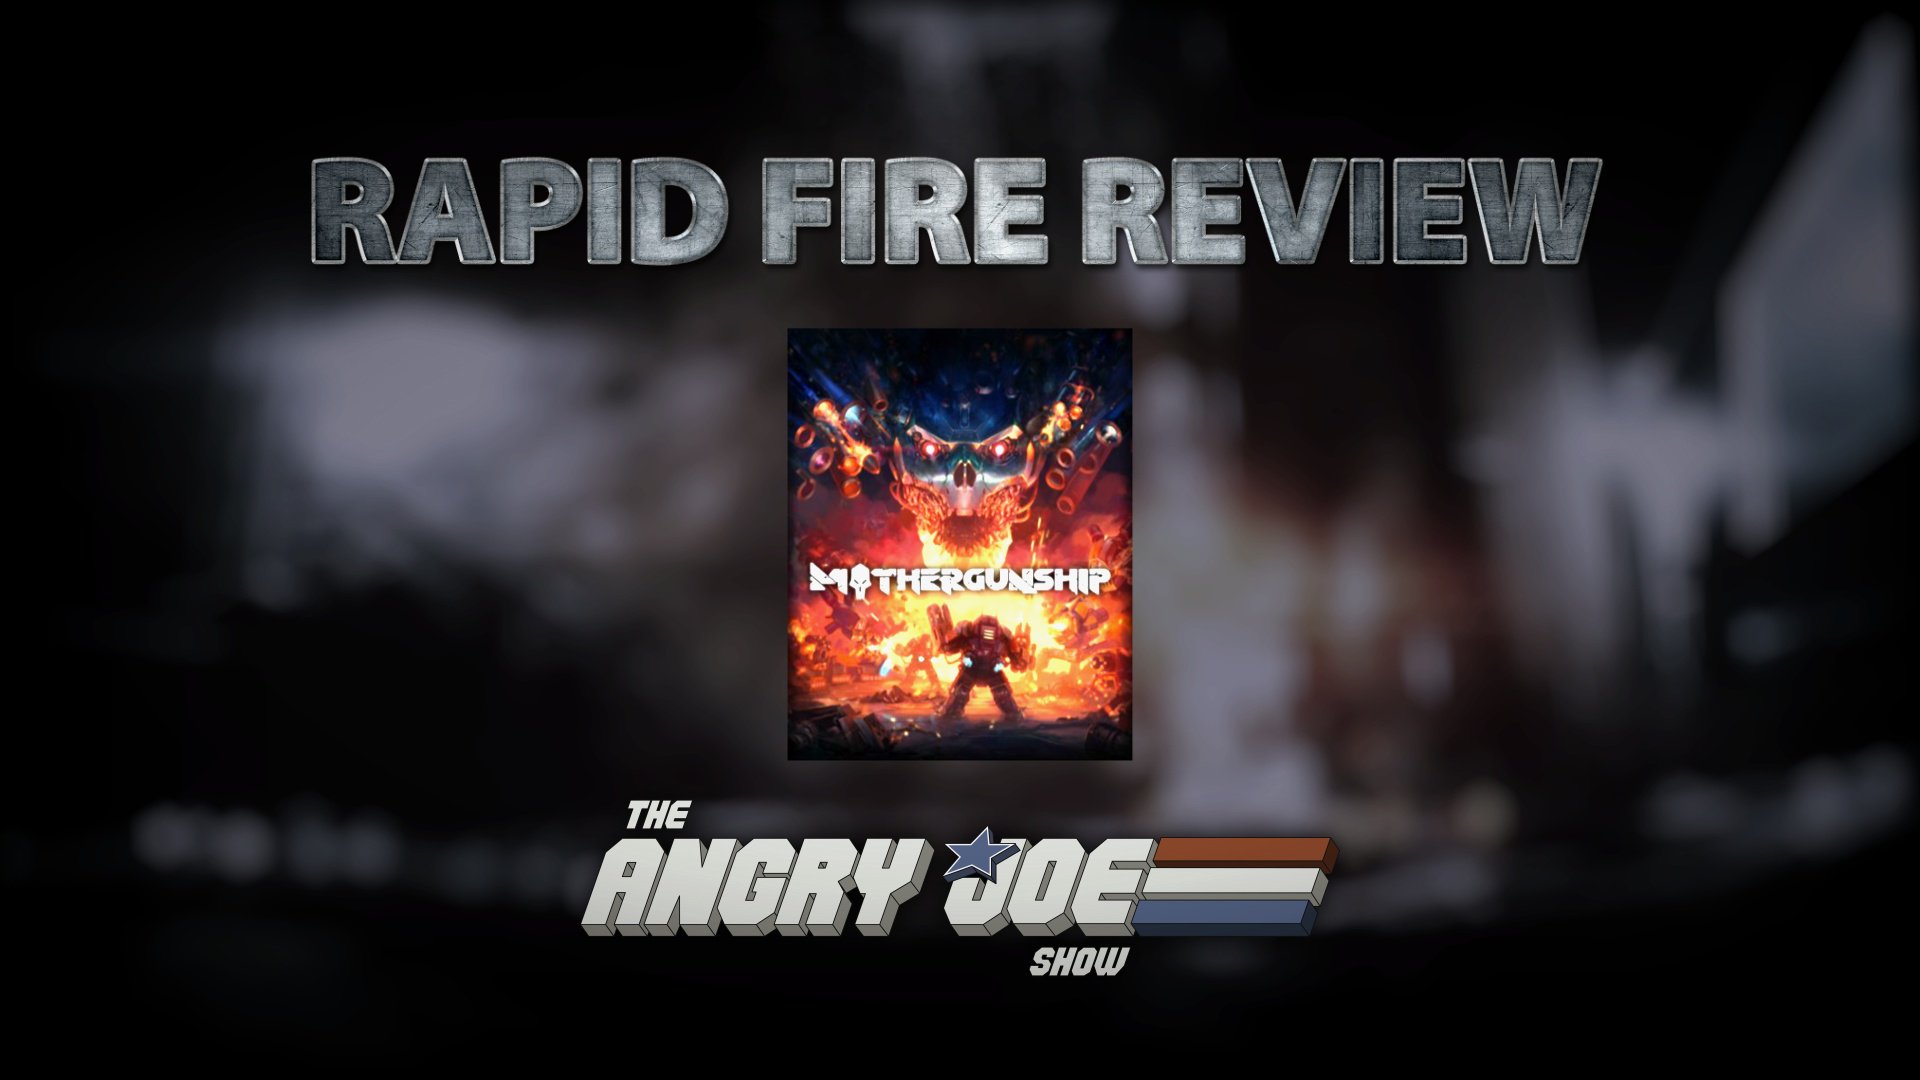 Joe Vargas First Person Bullet Hell How Does Mothergunship Compare Find Out In Our Rapid Fire Review Via Ajsadelrith T Co K4rh8jjgin Rt Share Plz T Co Fixrkrsna6